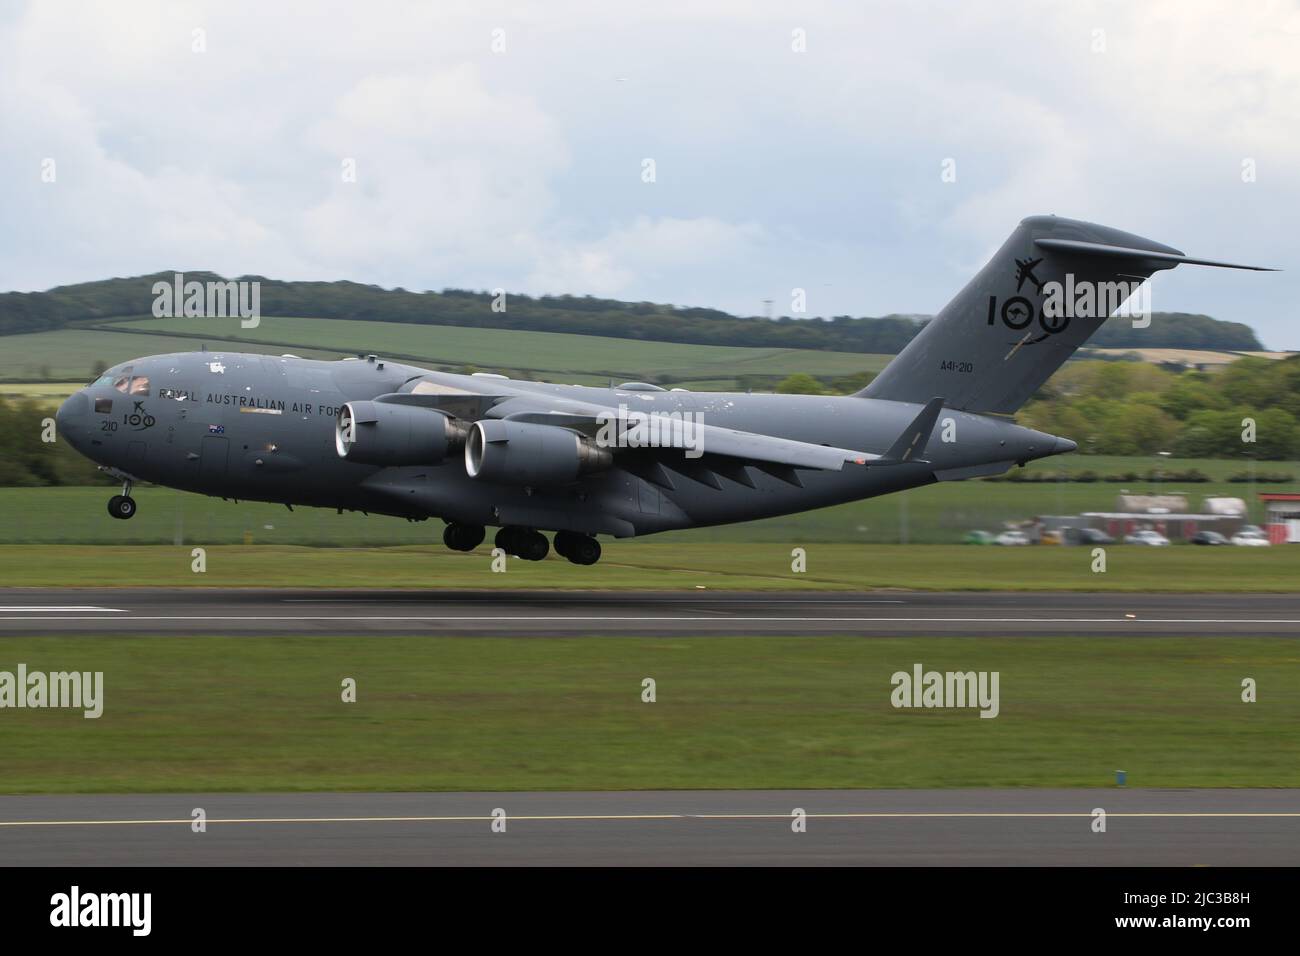 A41-210, a Boeing C-17 Globemaster III operated by the Royal Australian Air Force (RAAF), wearing markings to celebrate the force's centenial anniversary, arriving at Prestwick International Airport in Ayrshire, Scotland. Stock Photo